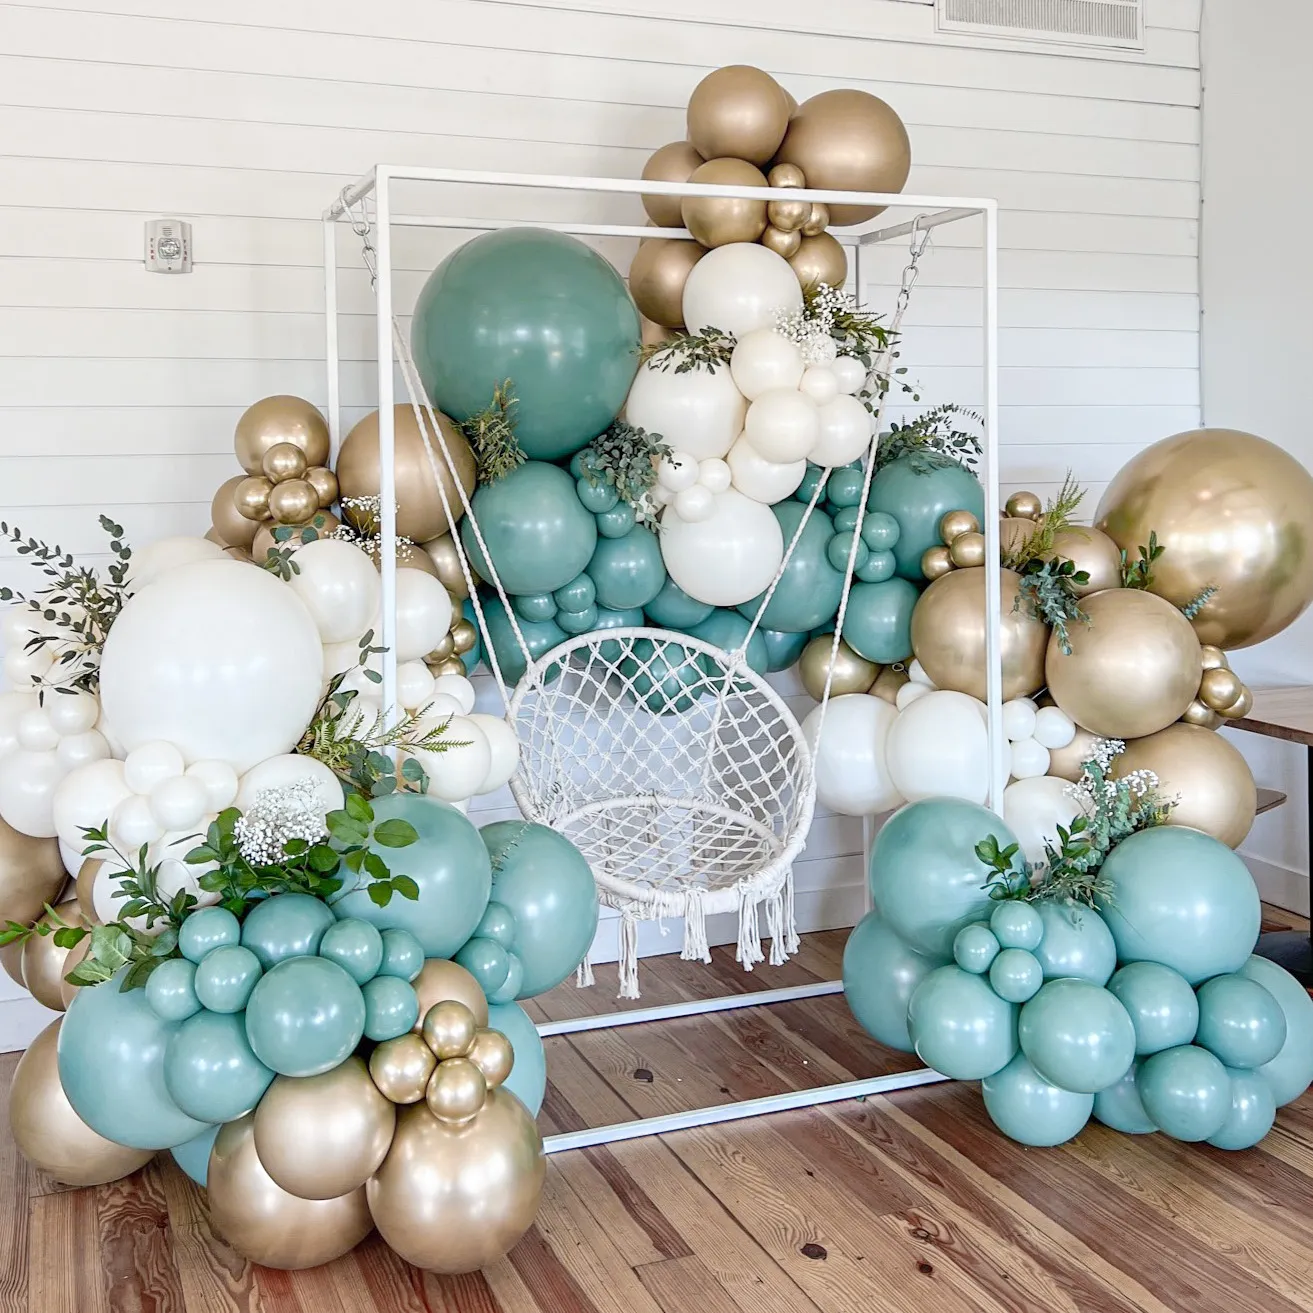 Dreamy decorations set for a party